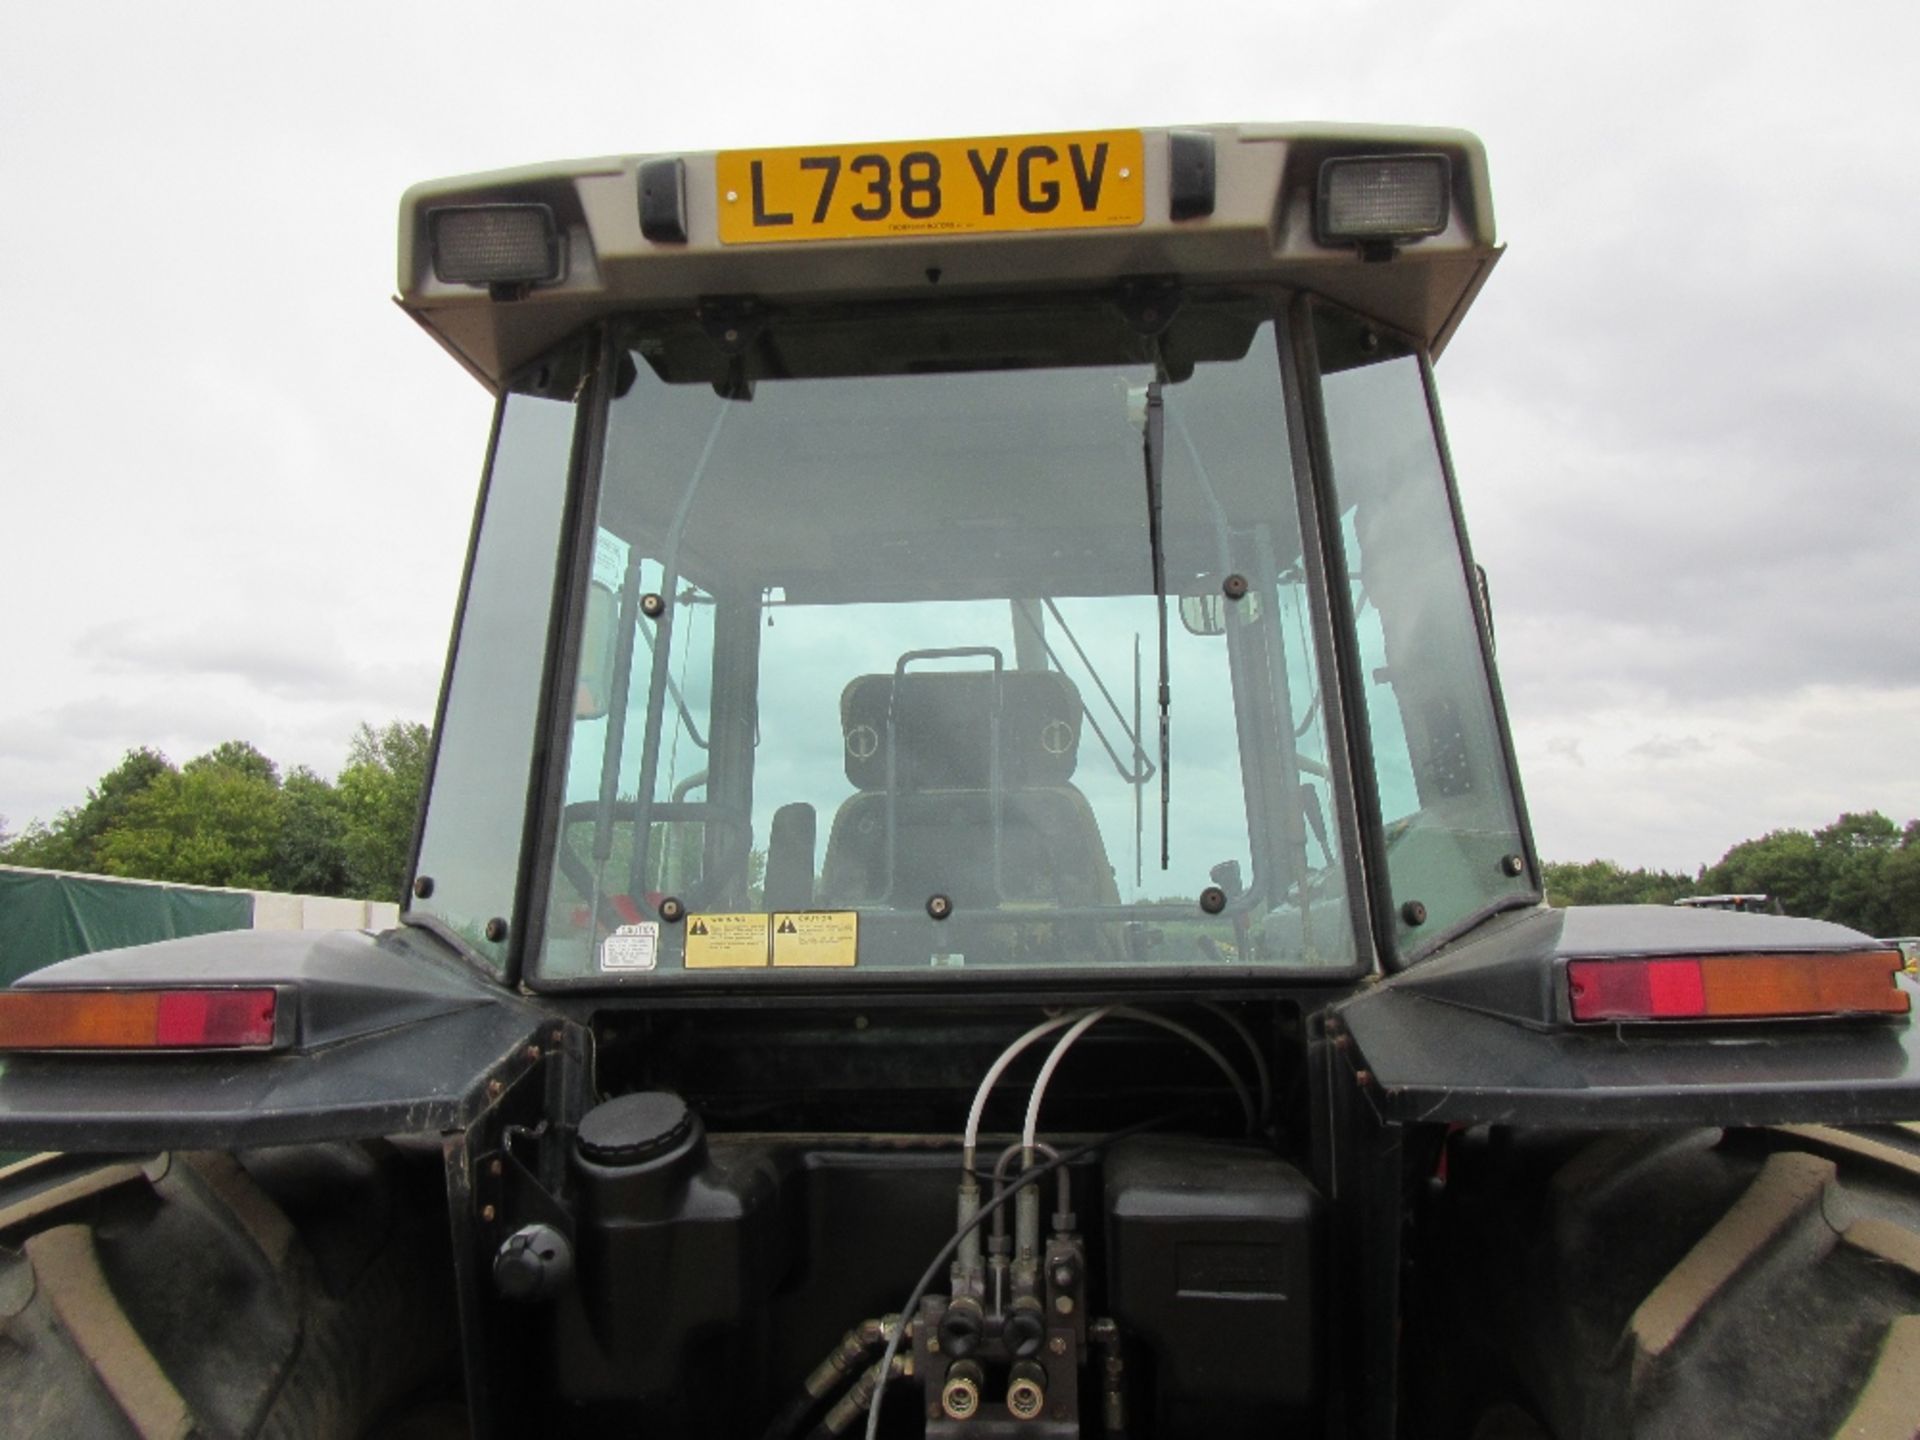 Massey Ferguson 3645 4wd Tractor with Front Weights. V5 will be supplied 5733 Hrs Reg No L738 YGV - Image 8 of 17